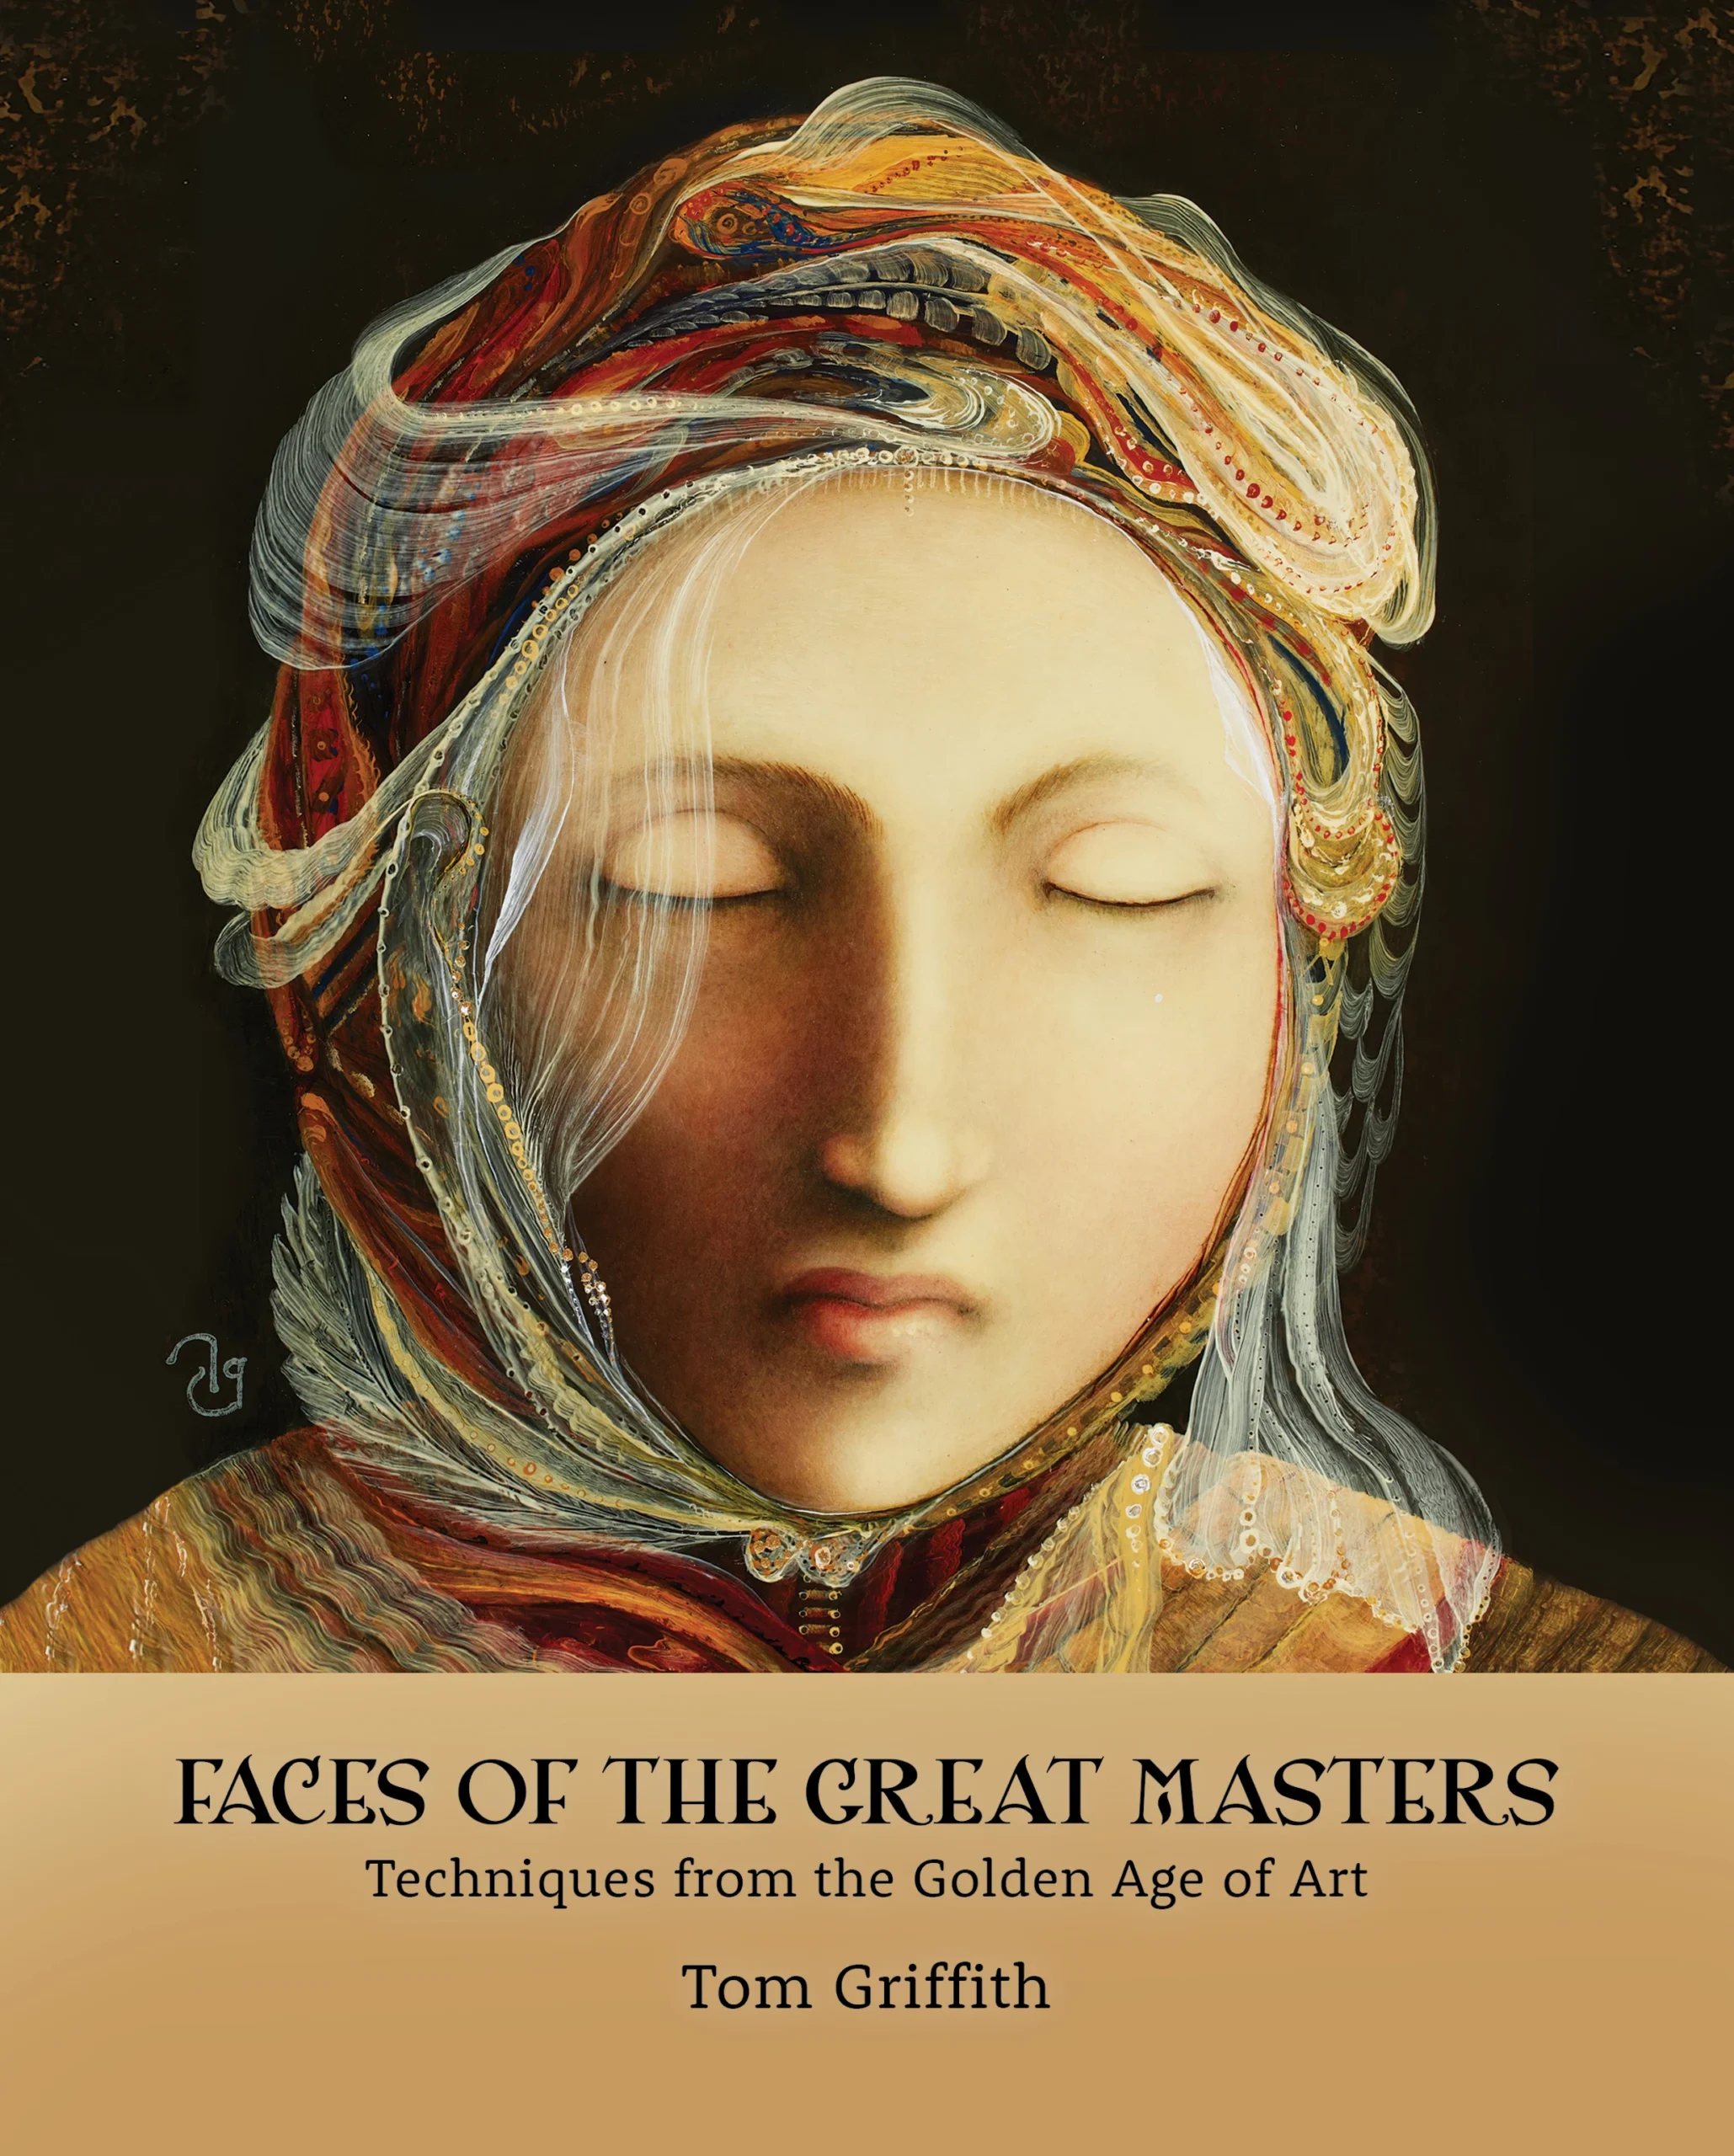 faces of the great masters book cover